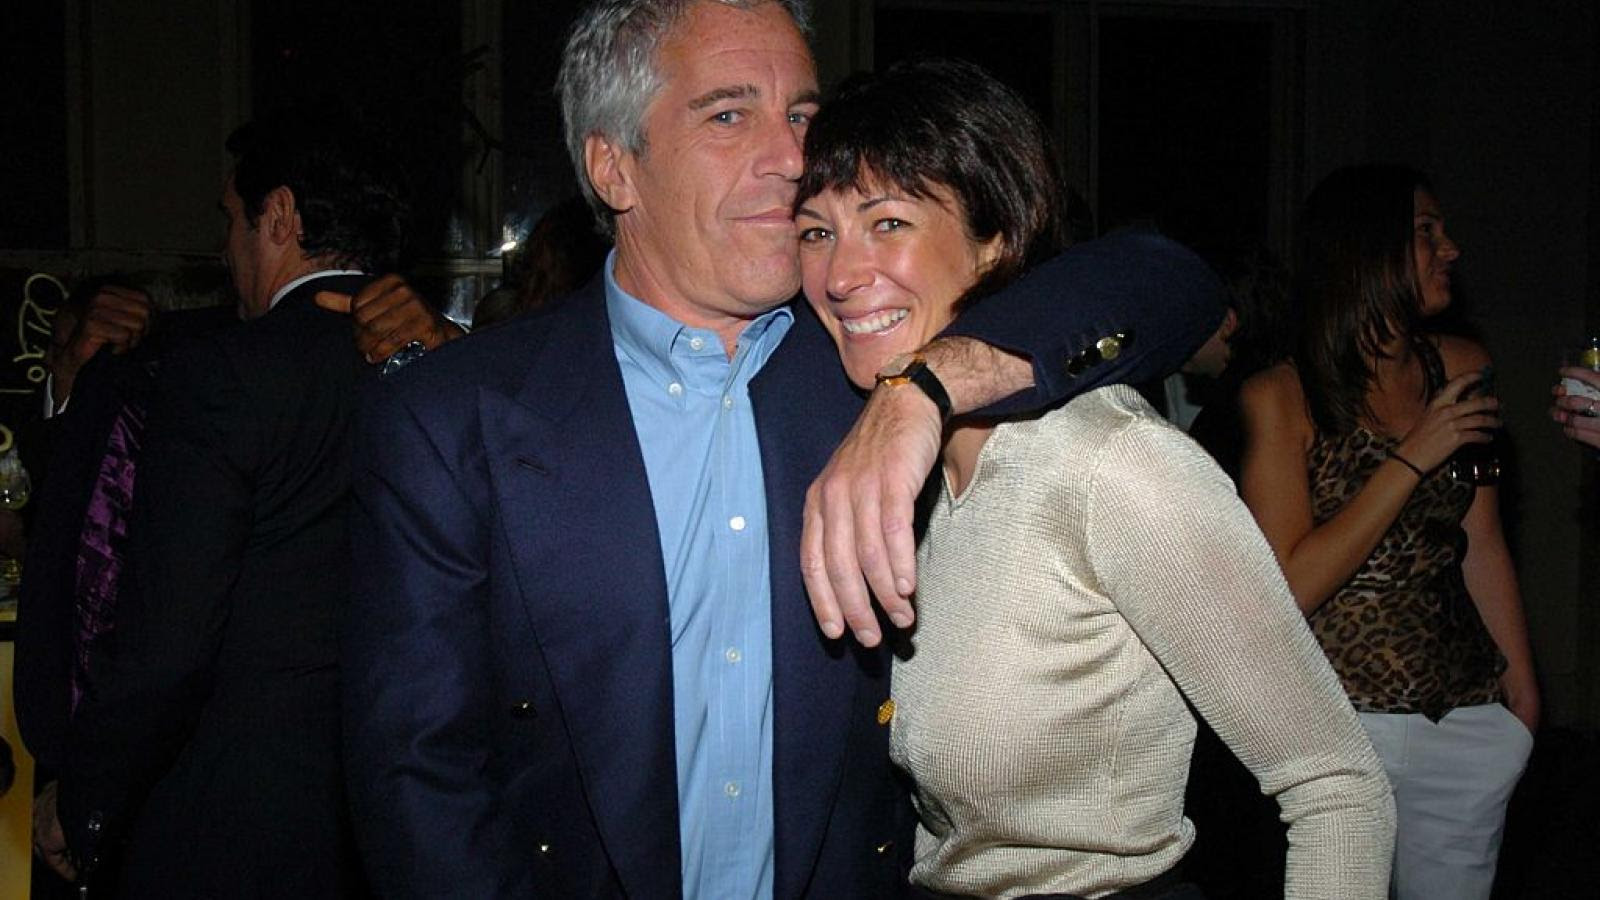 UPDATES - Jury finds Ghislaine Maxwell guilty GettyImages-590696434